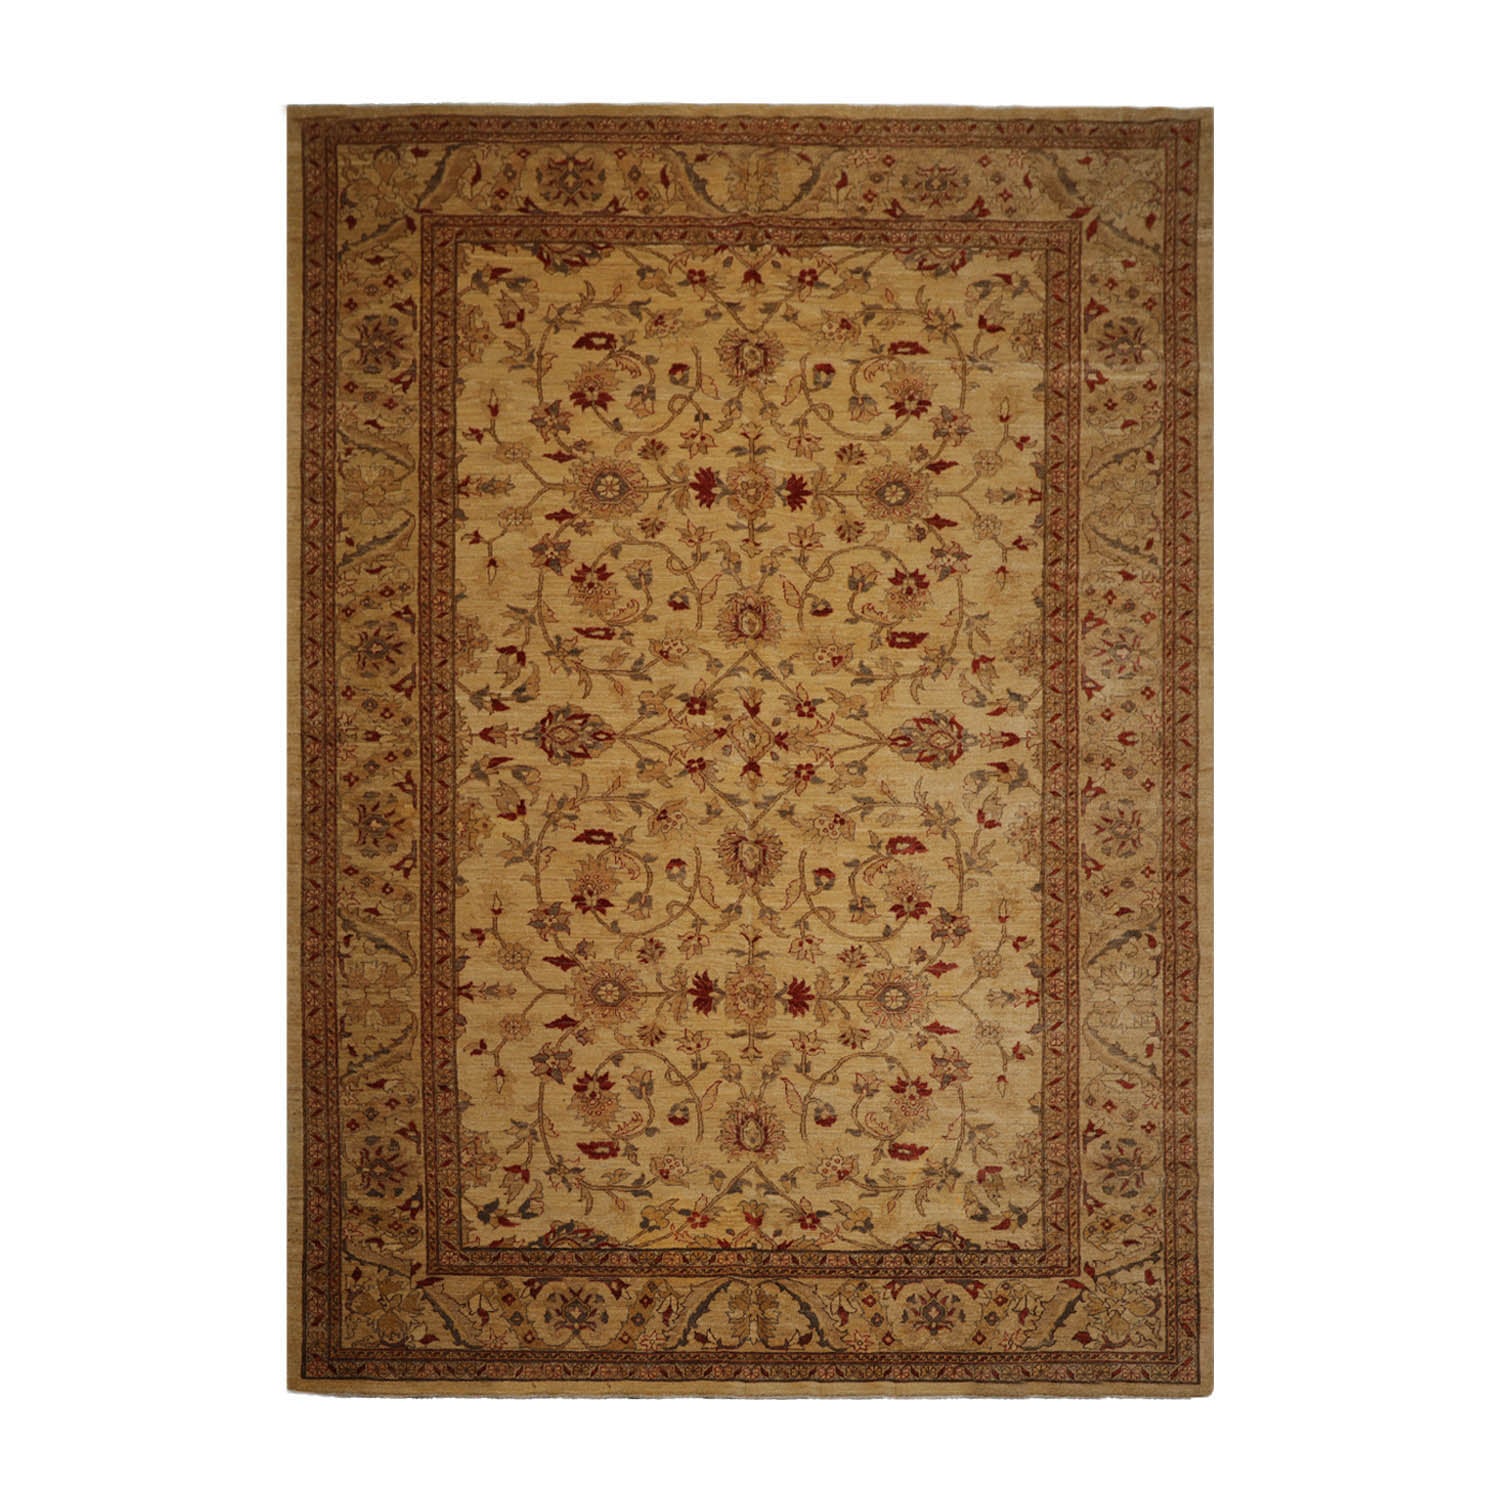 Corrigan 10x14 Hand Knotted 100% Wool Peshawar Traditional Oriental Area Rug Light Gold, Rust Color